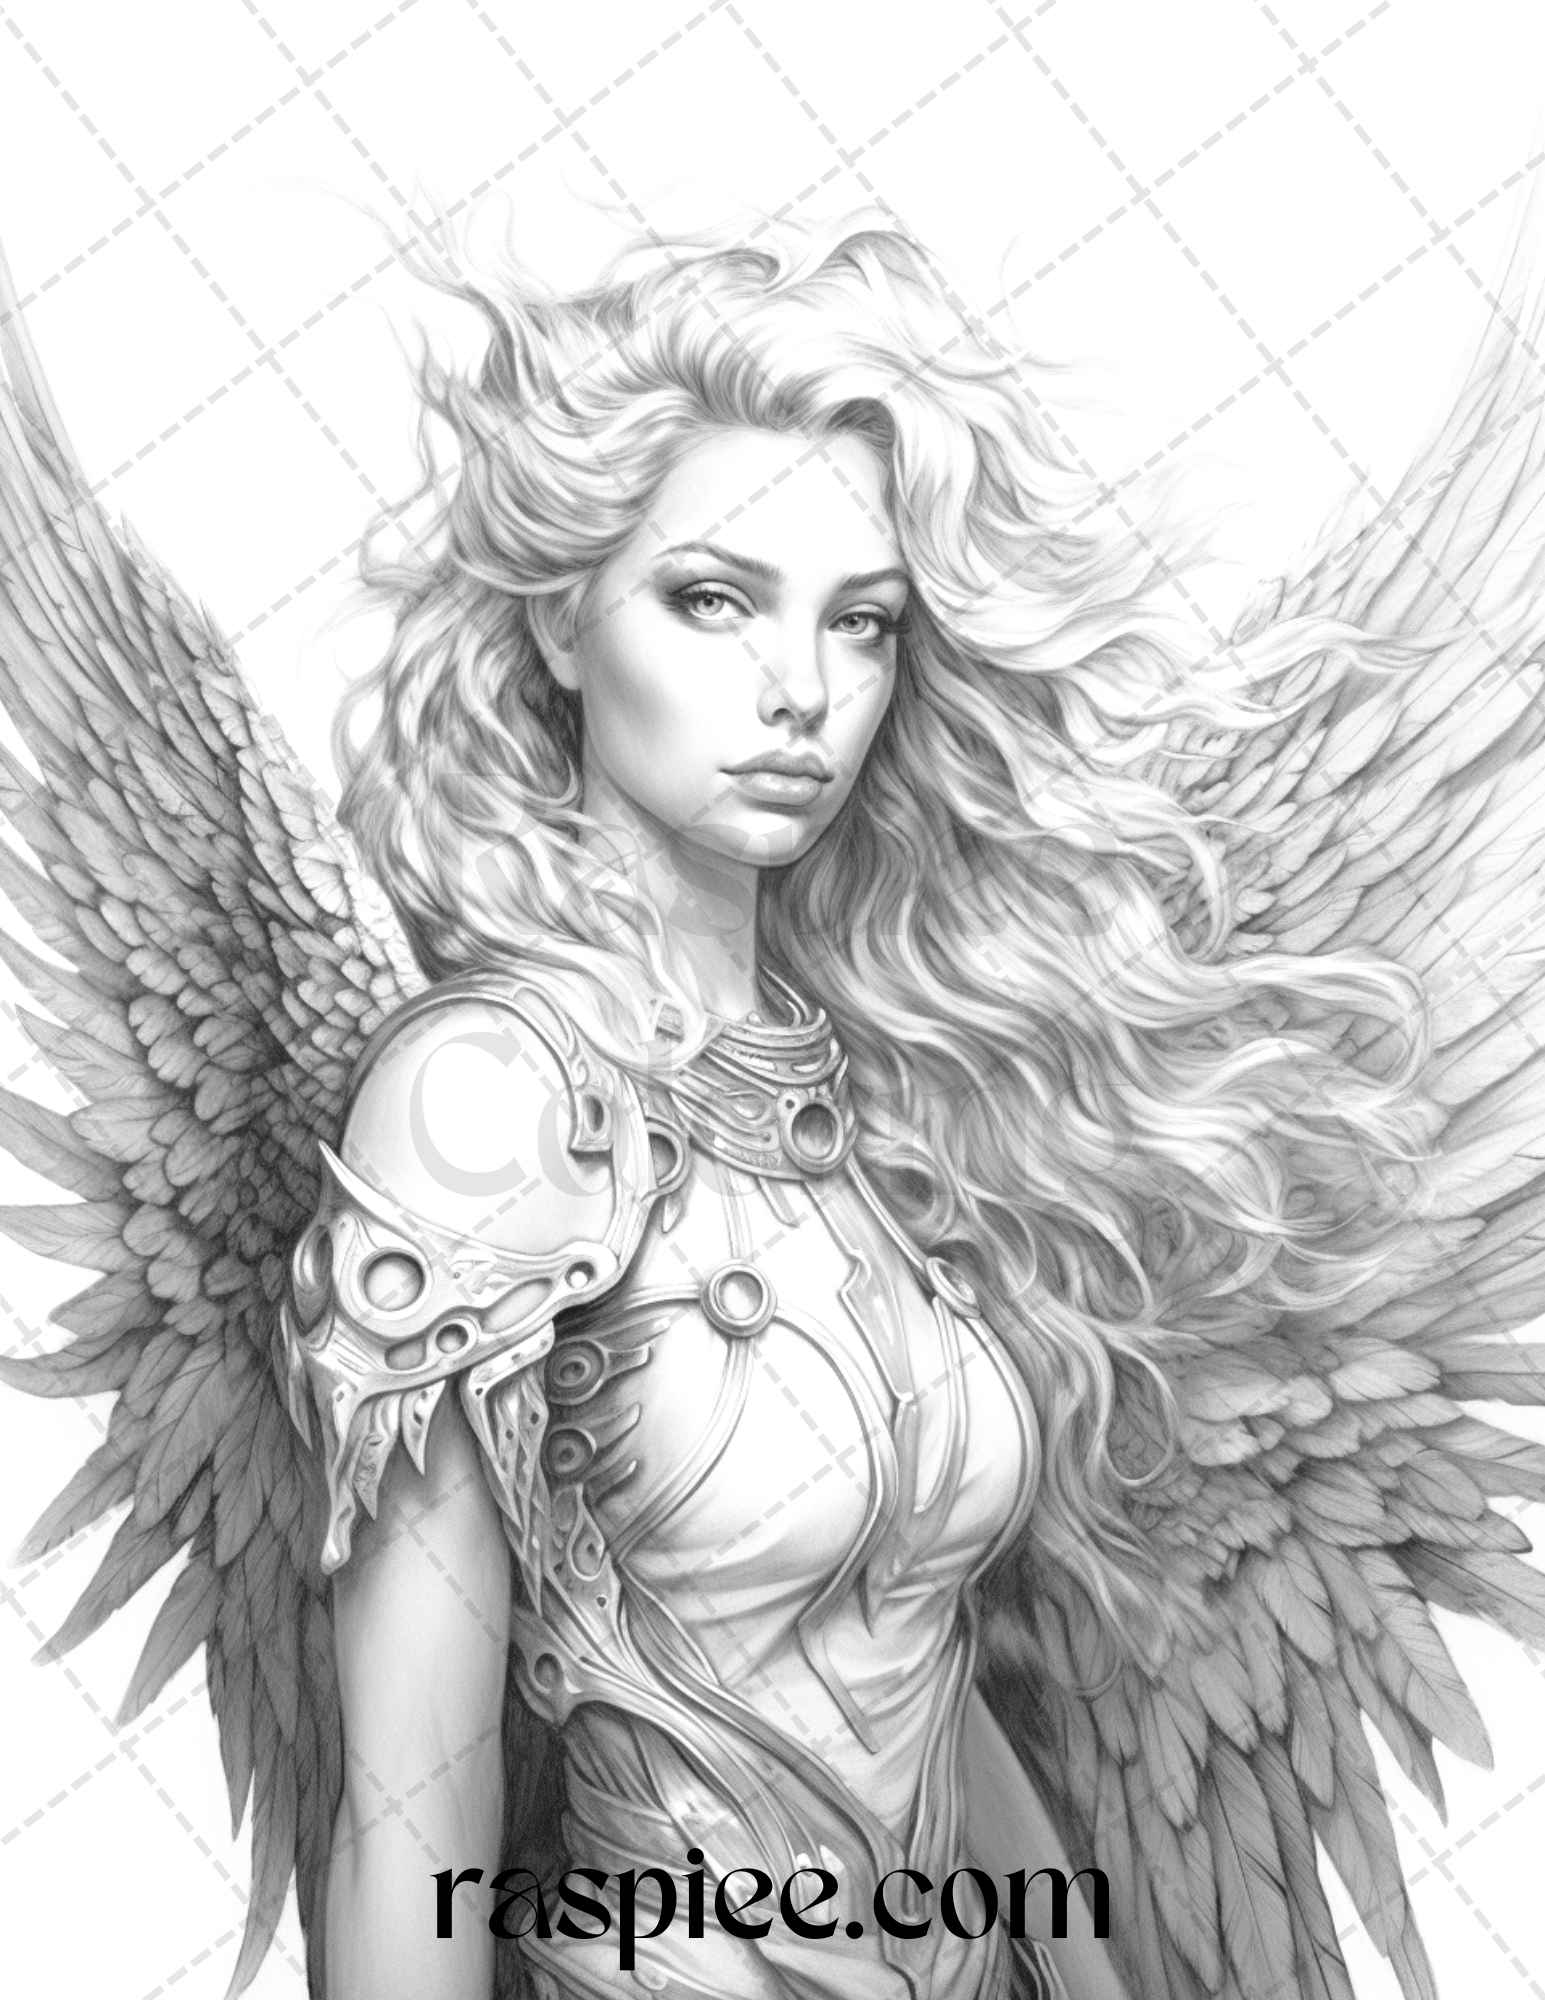 Enchanting Angels Grayscale Coloring Page for Adults, Stress-Relieving Angel Coloring Design